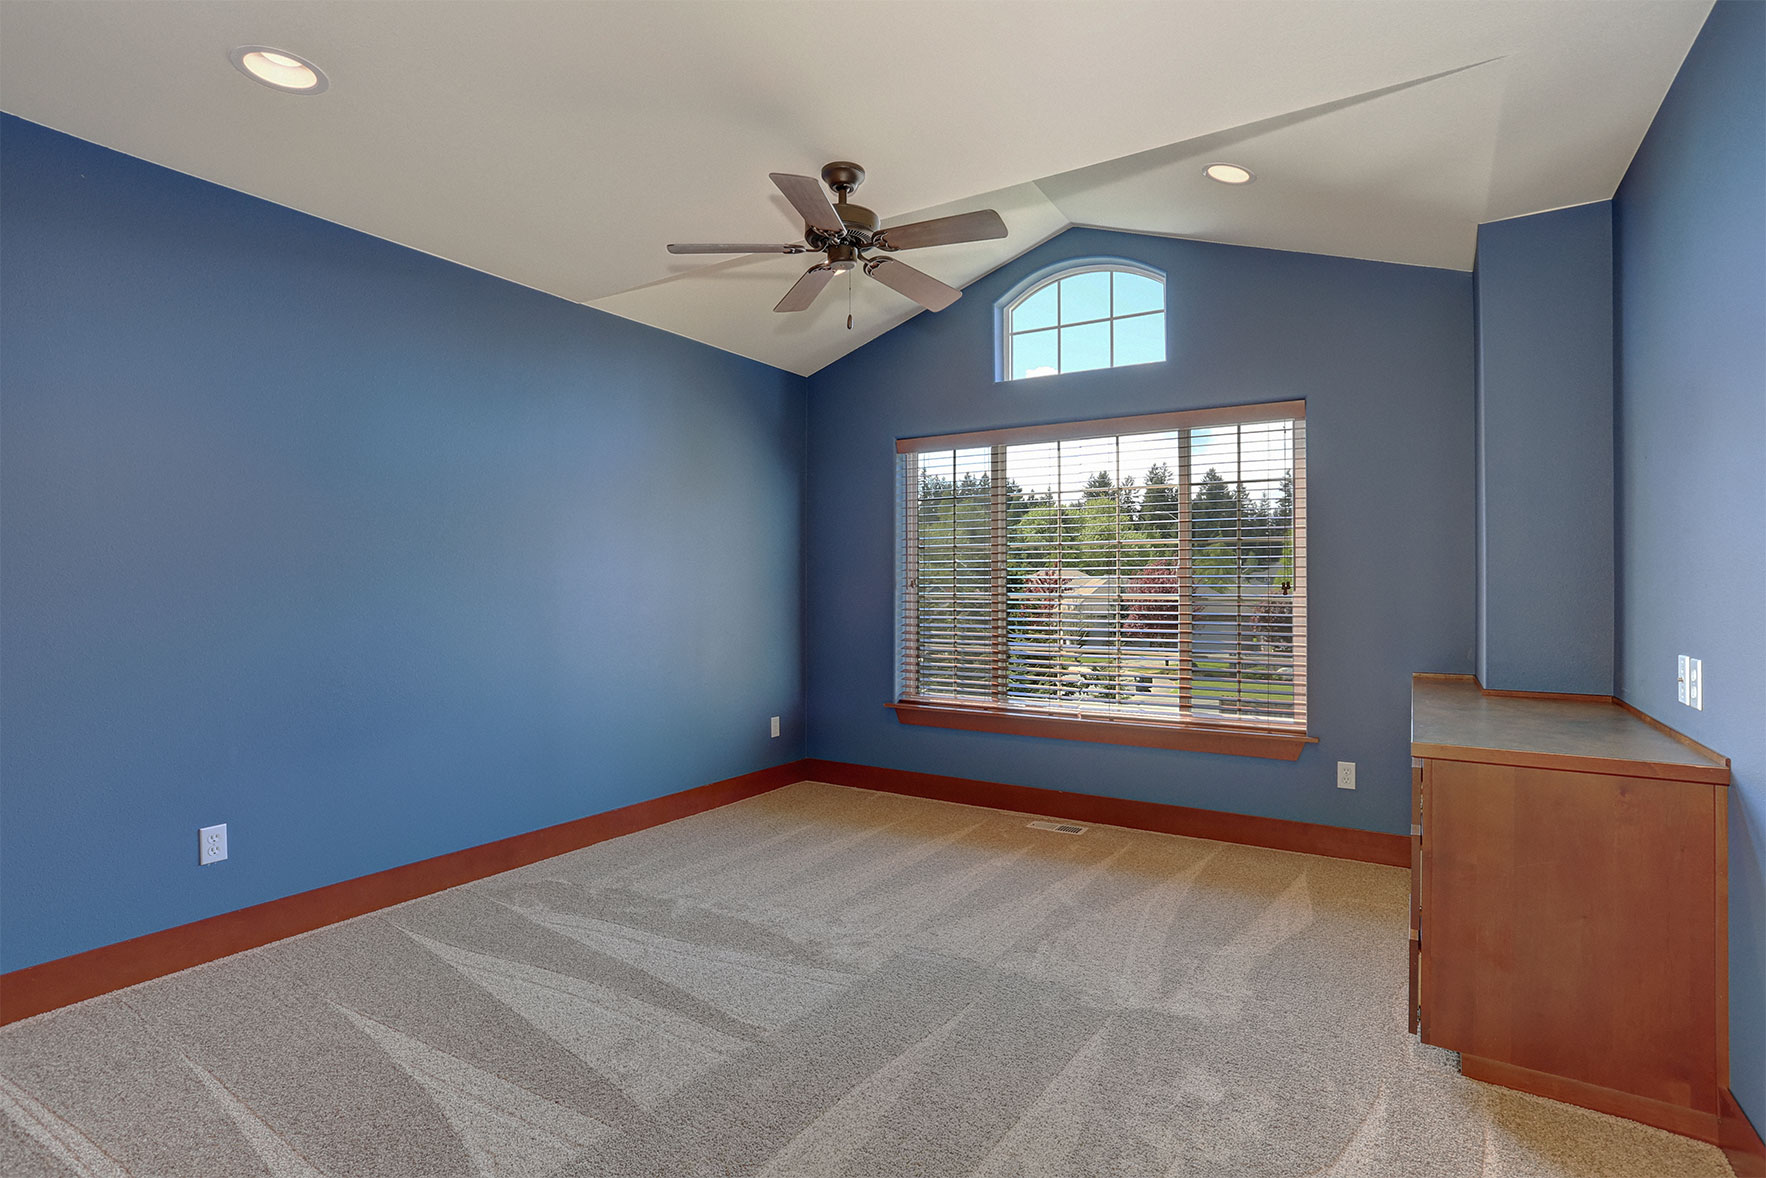 A room that has a ceiling fan, large windows, a grey carpet, wooden cabinet and a fresh coat of blue interior paint.